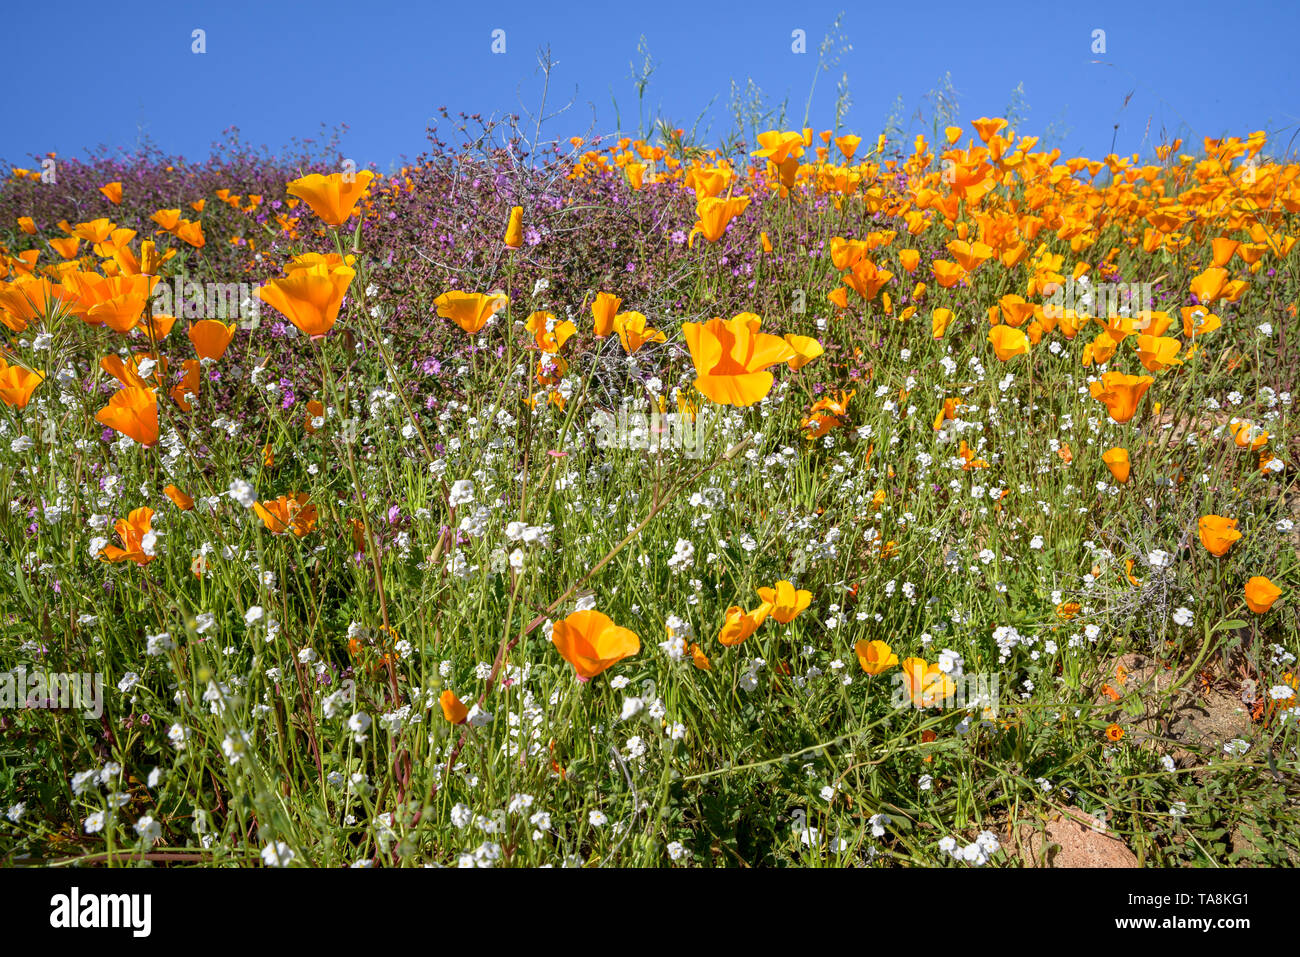 A California Super Bloom leaves the desert hillsides covered in vibrantly colored poppy floweres. Springtime is here. Stock Photo